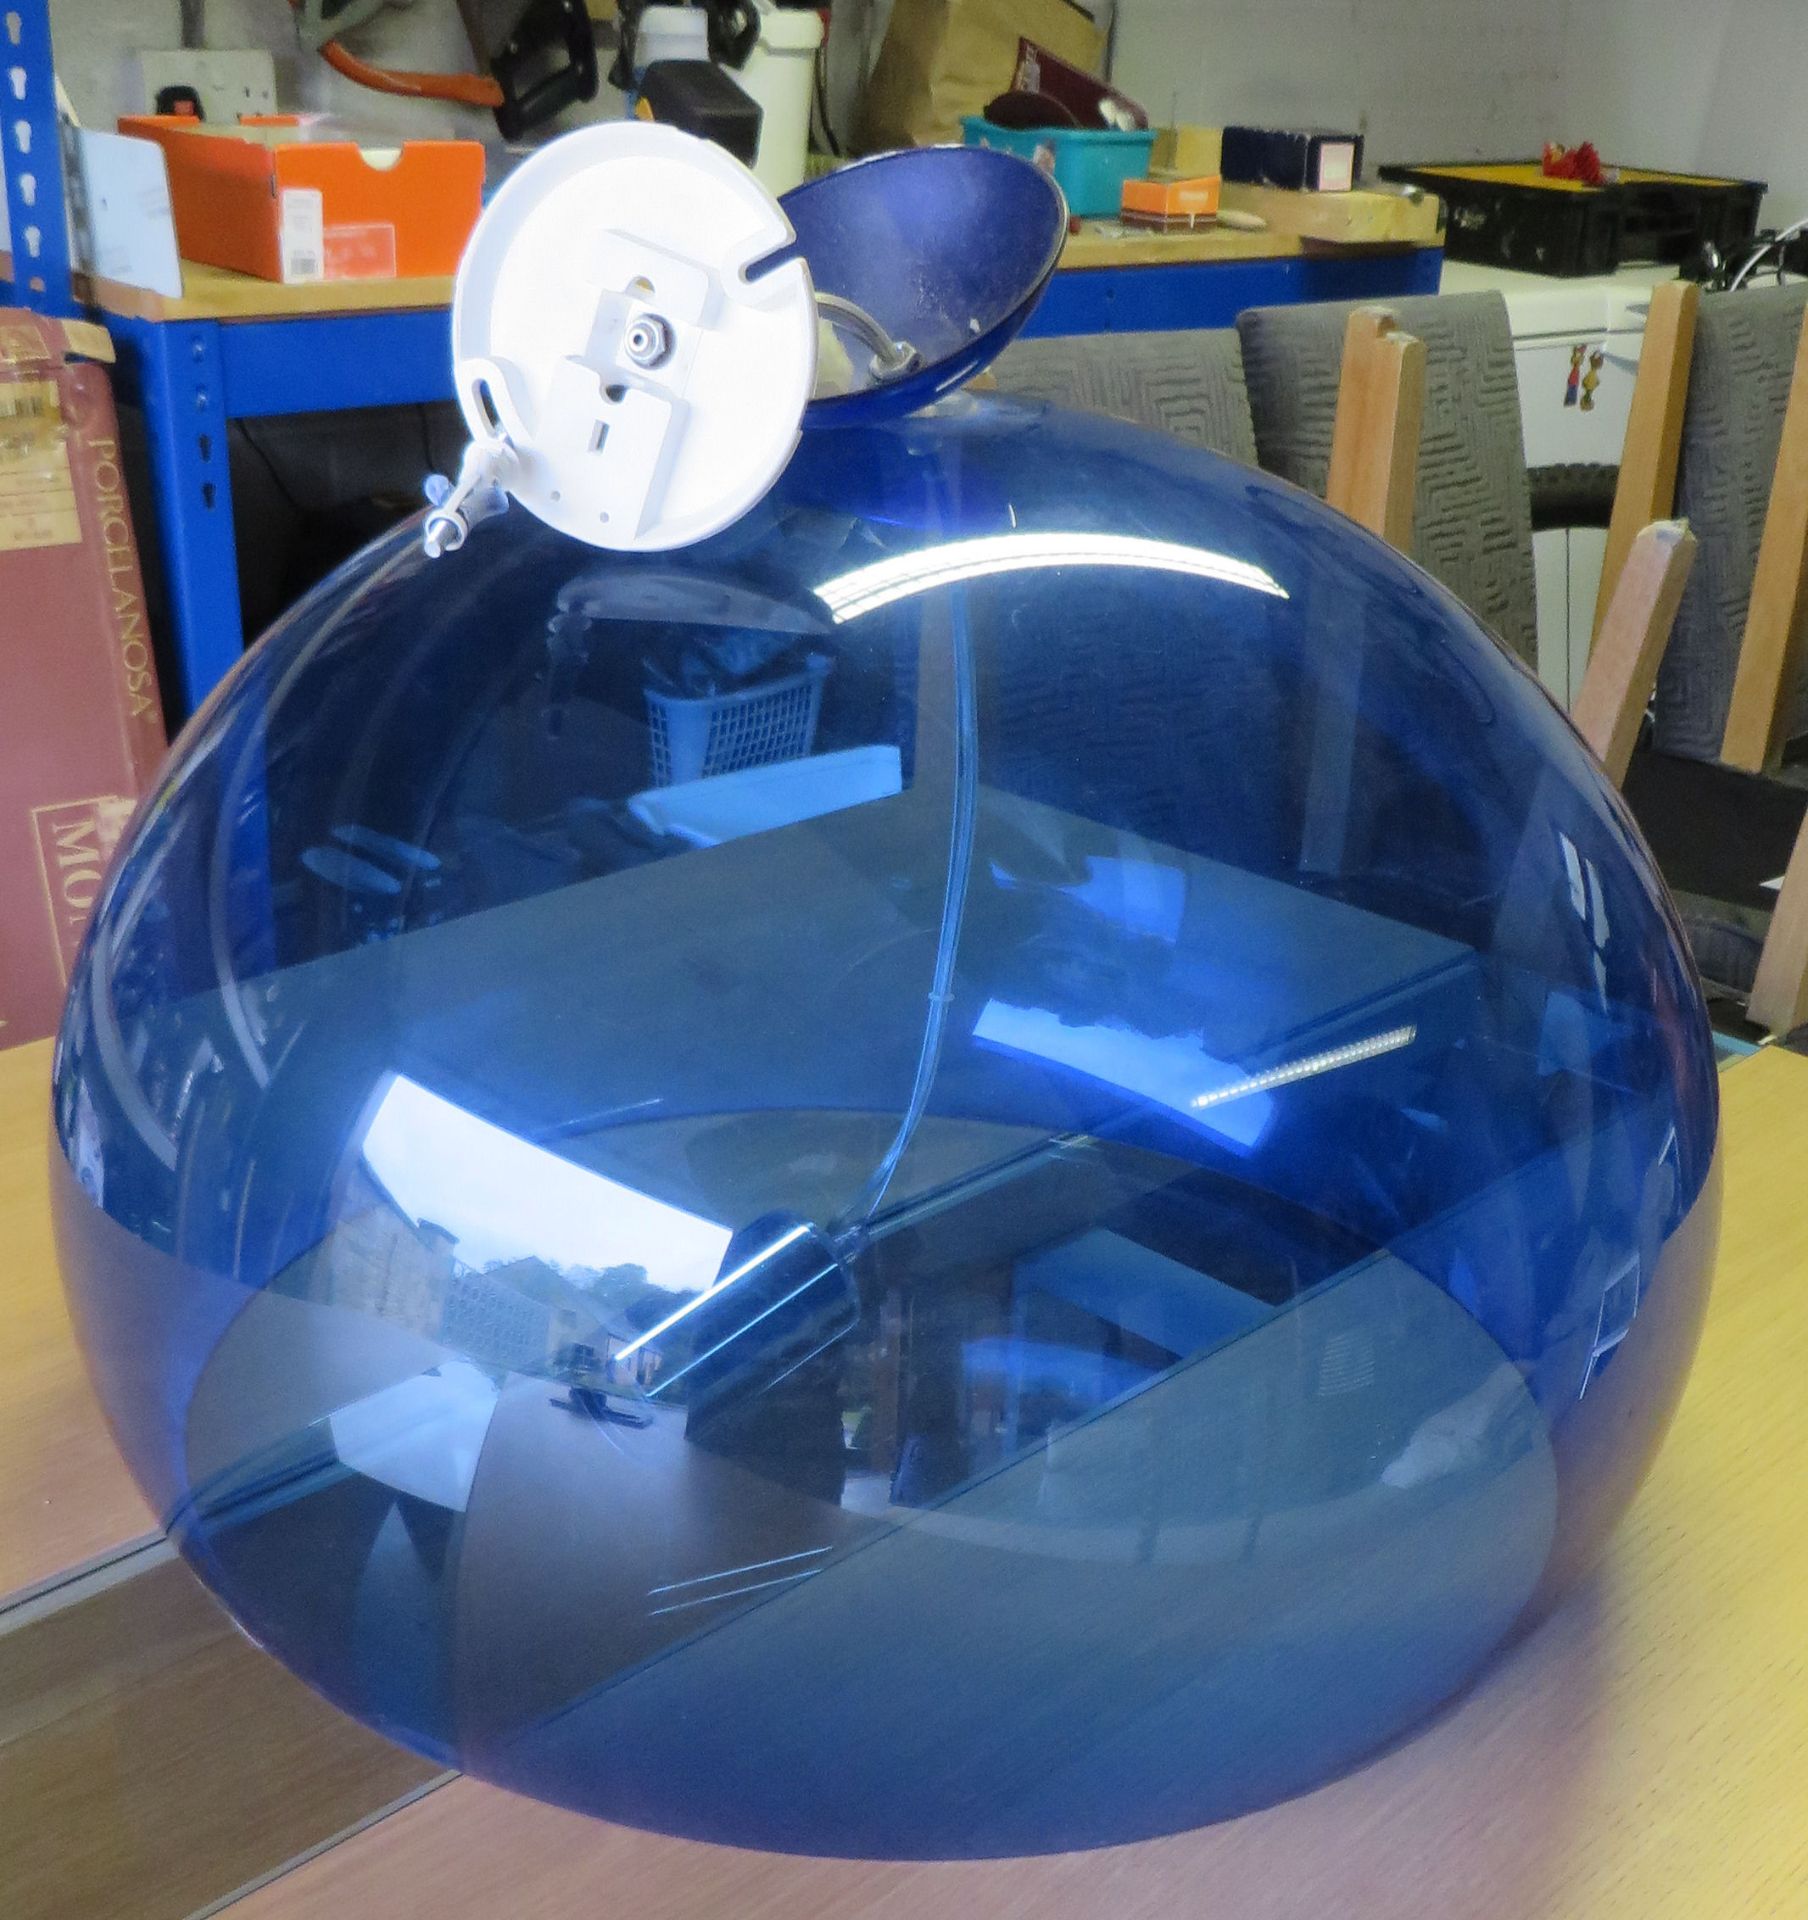 1 x Kartell Fly Contemporary Blue Perspex Pendant Light - 52cm Diameter x 33cm Height - CL175 - - Image 2 of 3